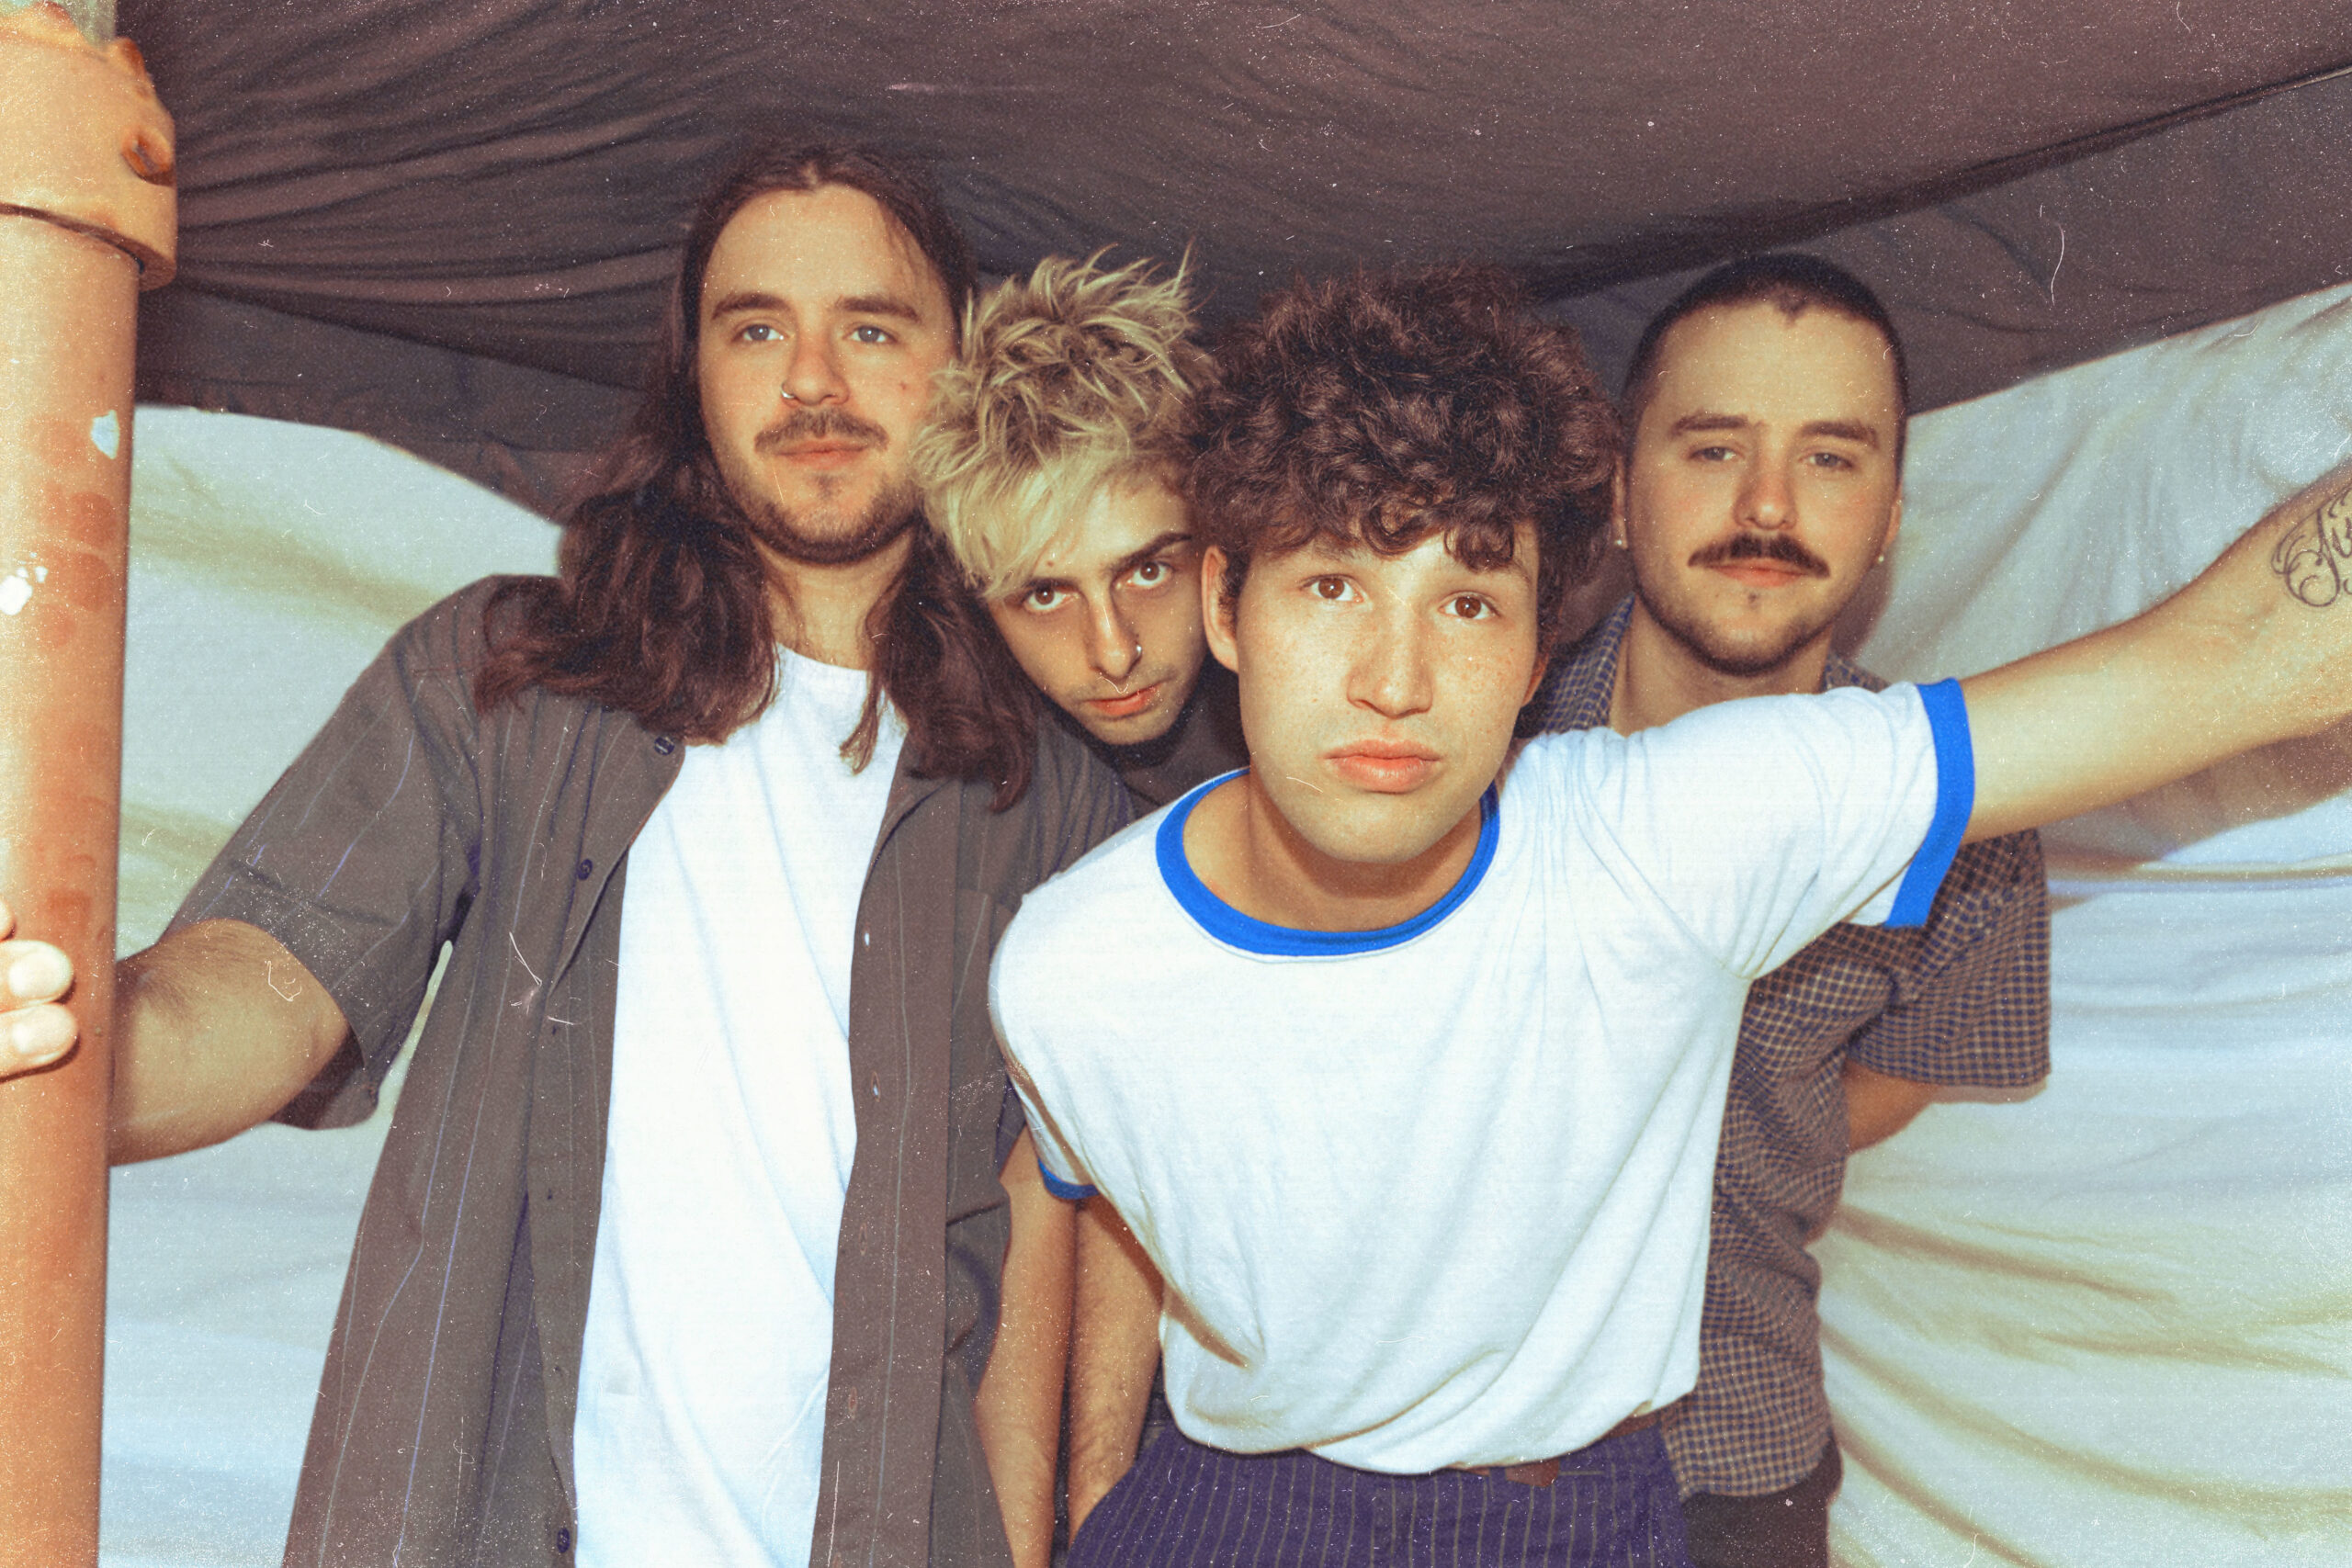 BAKERS EDDY RELEASE NEW SINGLE ‘T-SHIRT’ + HEADLINE TOUR KICKING OFF THIS MONTH